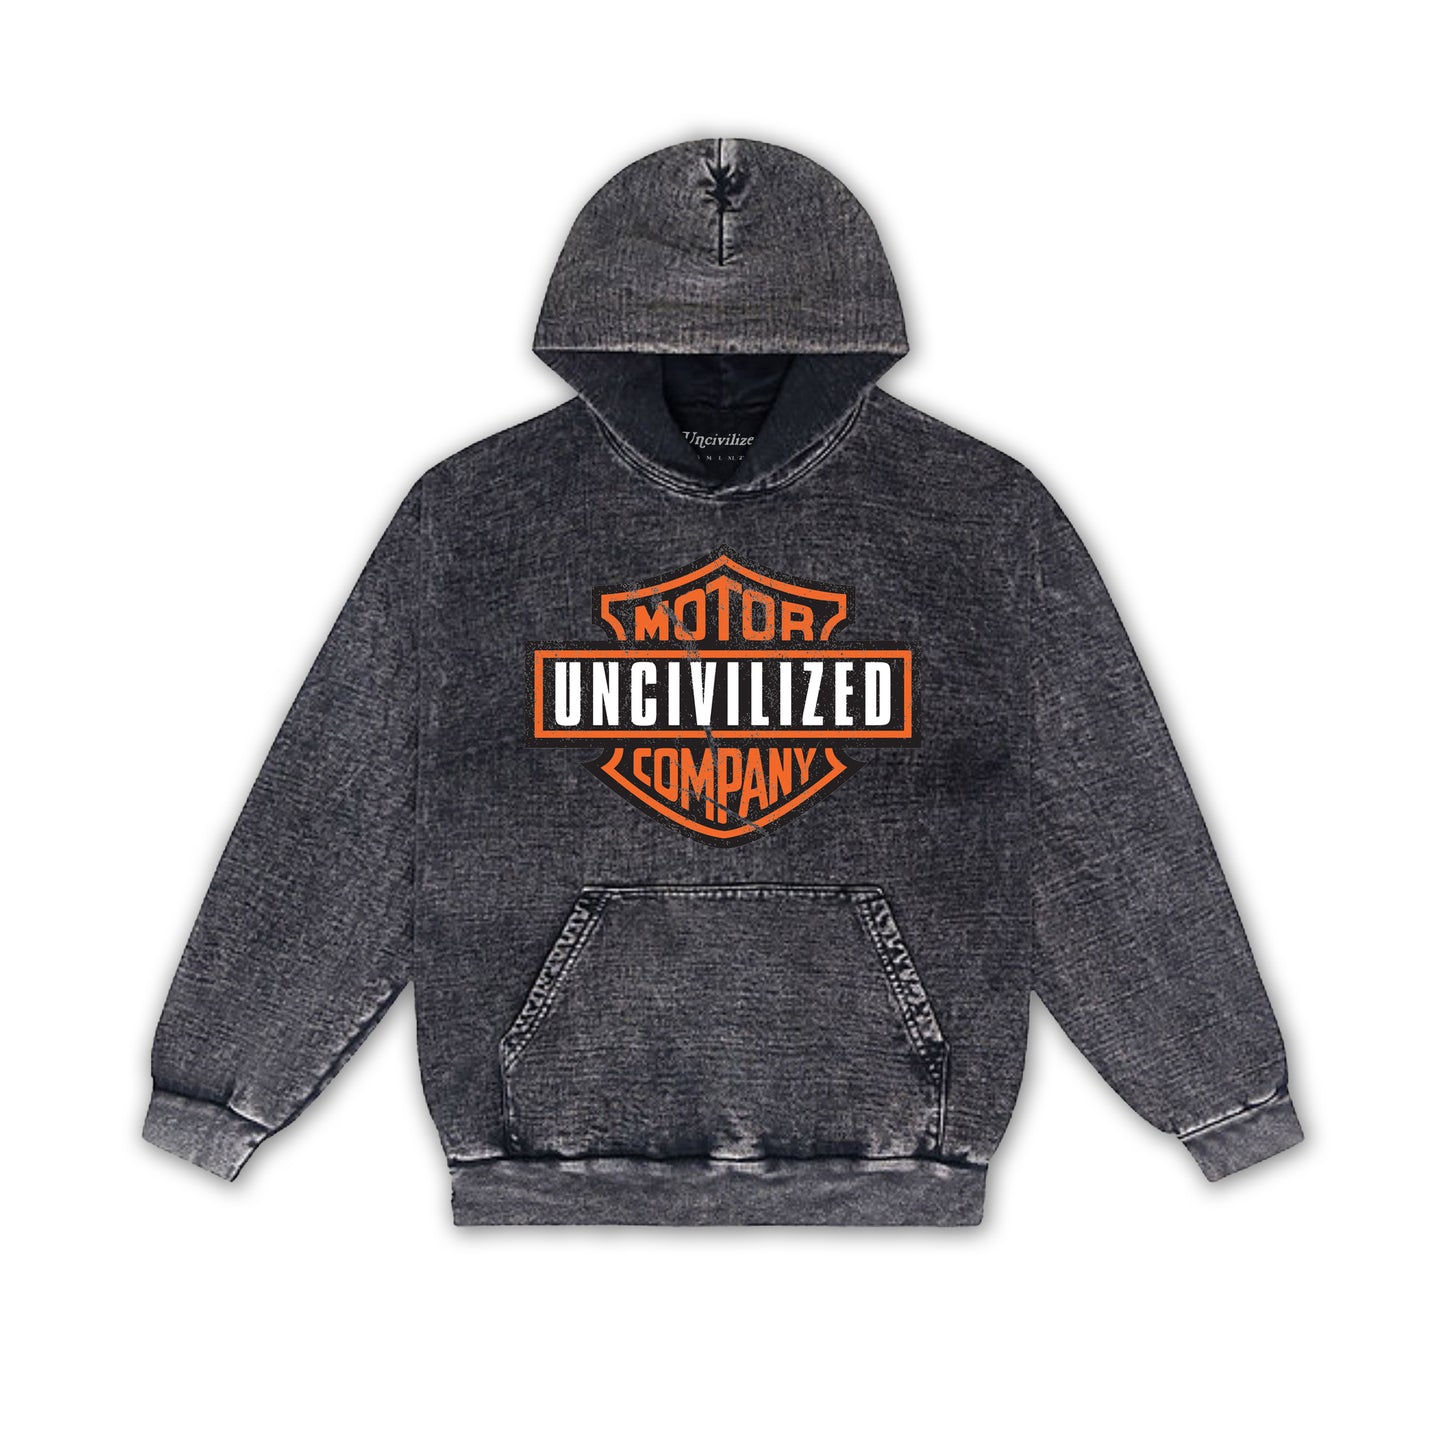 EARLY ACCESS: UNCIVILIZED "GHOSTRIDER" HOODIE